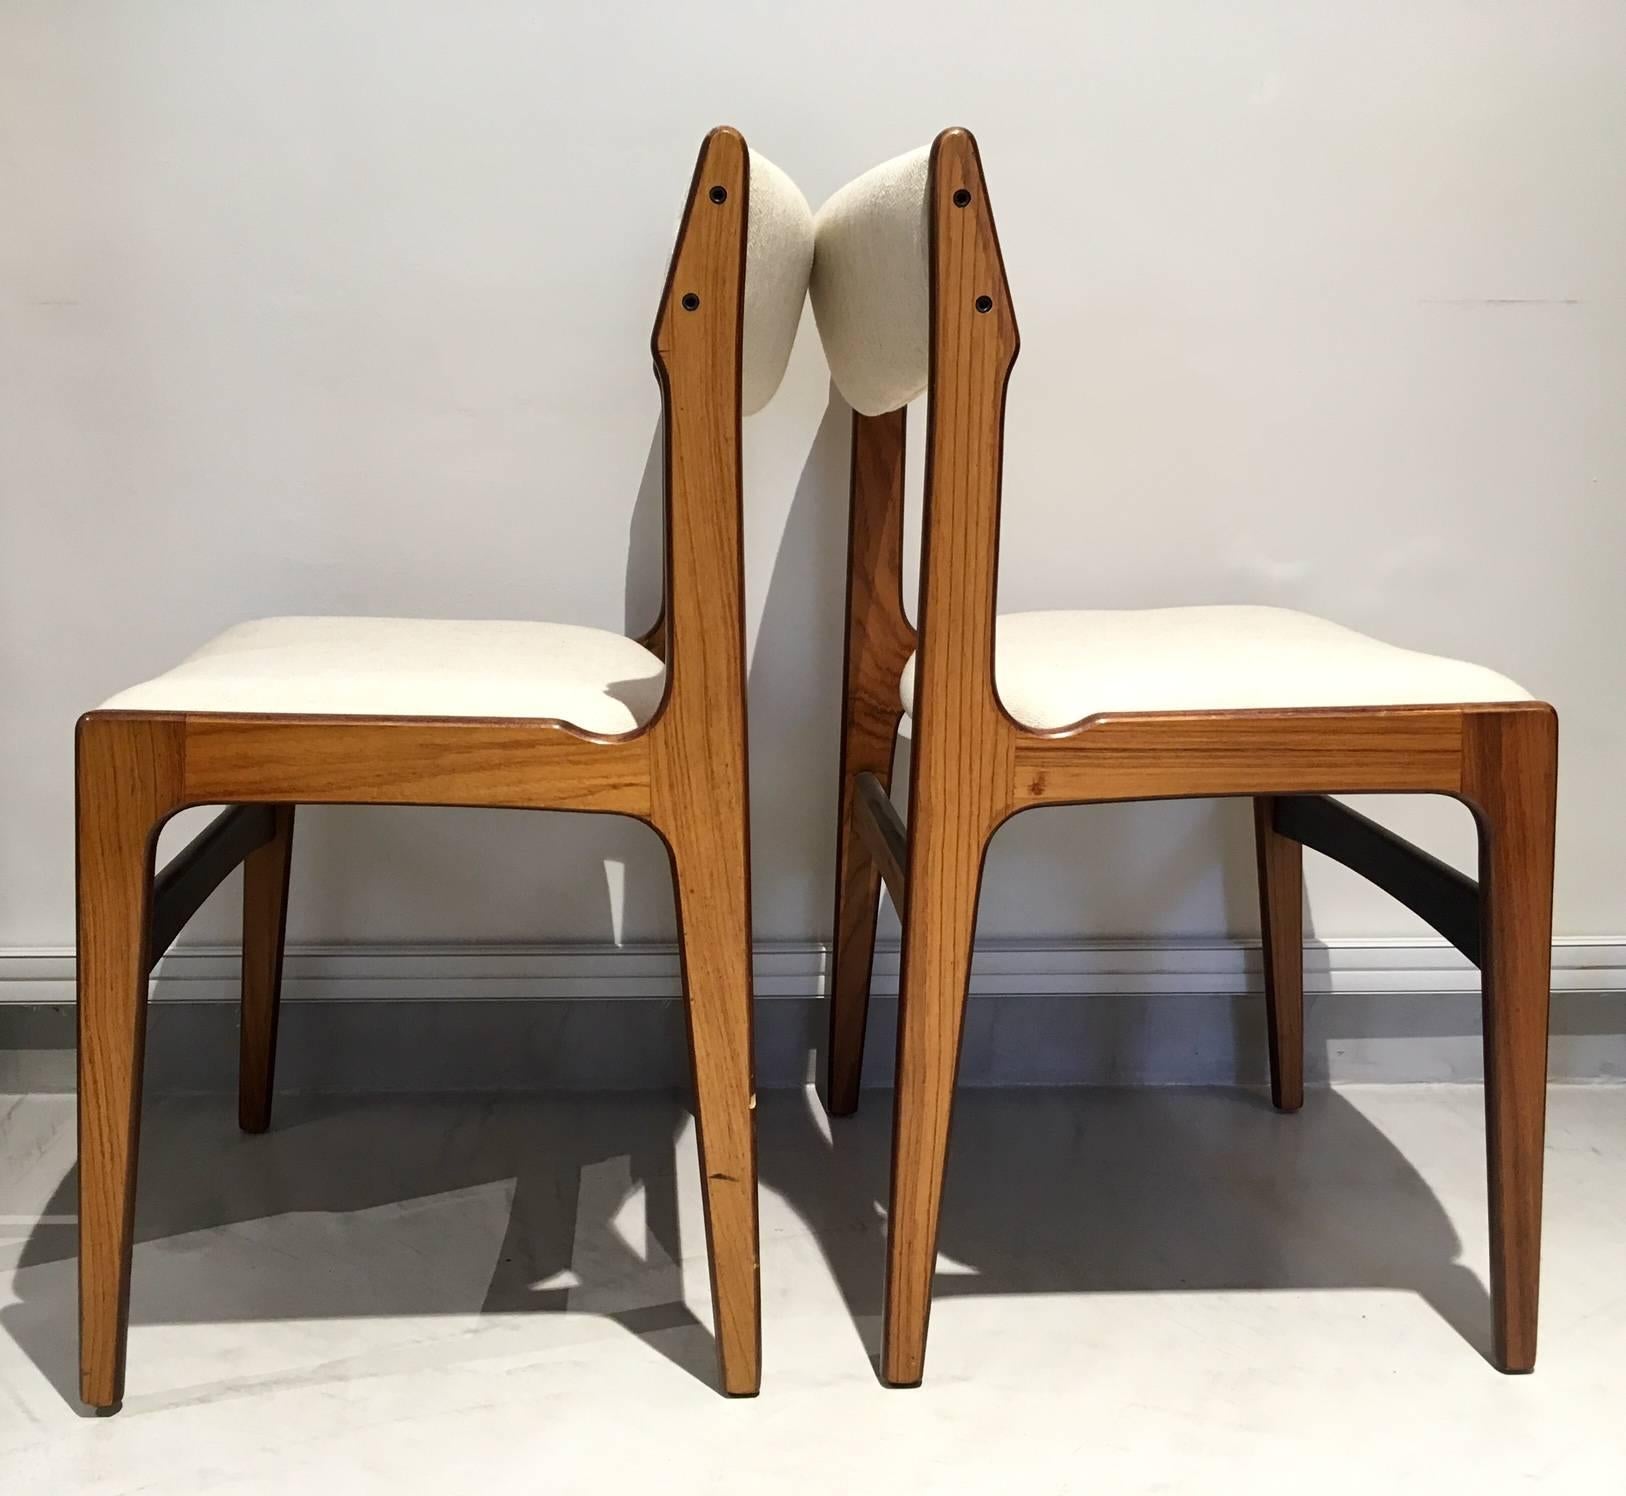 20th Century Set of Six Midcentury Danish Wooden Dining Chairs with White Covers